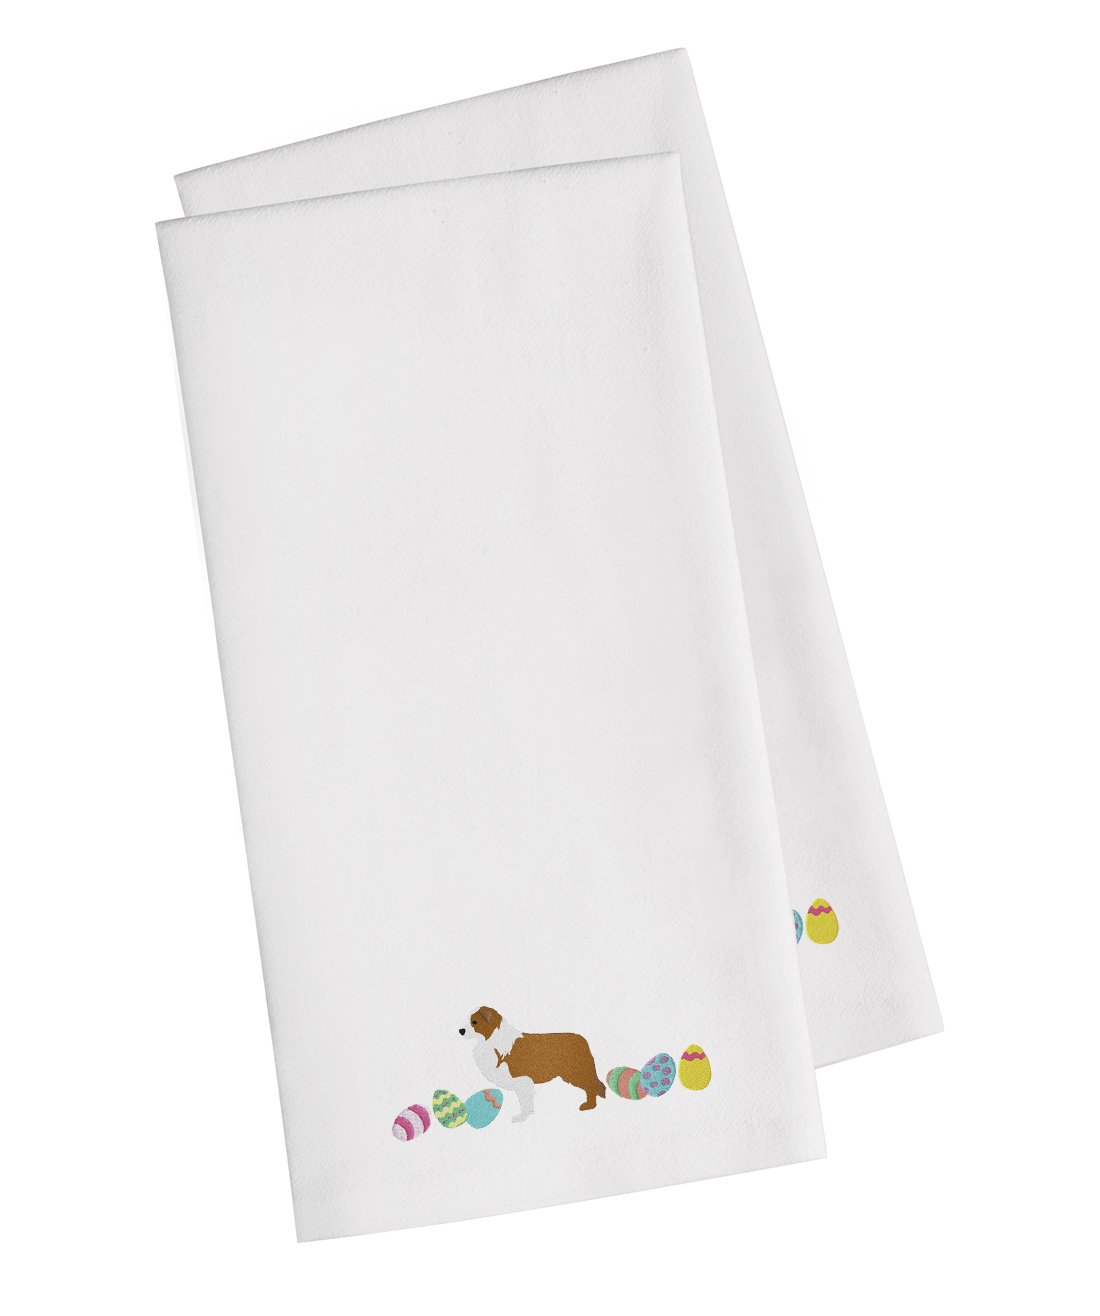 Red Border Collie Easter White Embroidered Kitchen Towel Set of 2 CK1677WHTWE by Caroline's Treasures